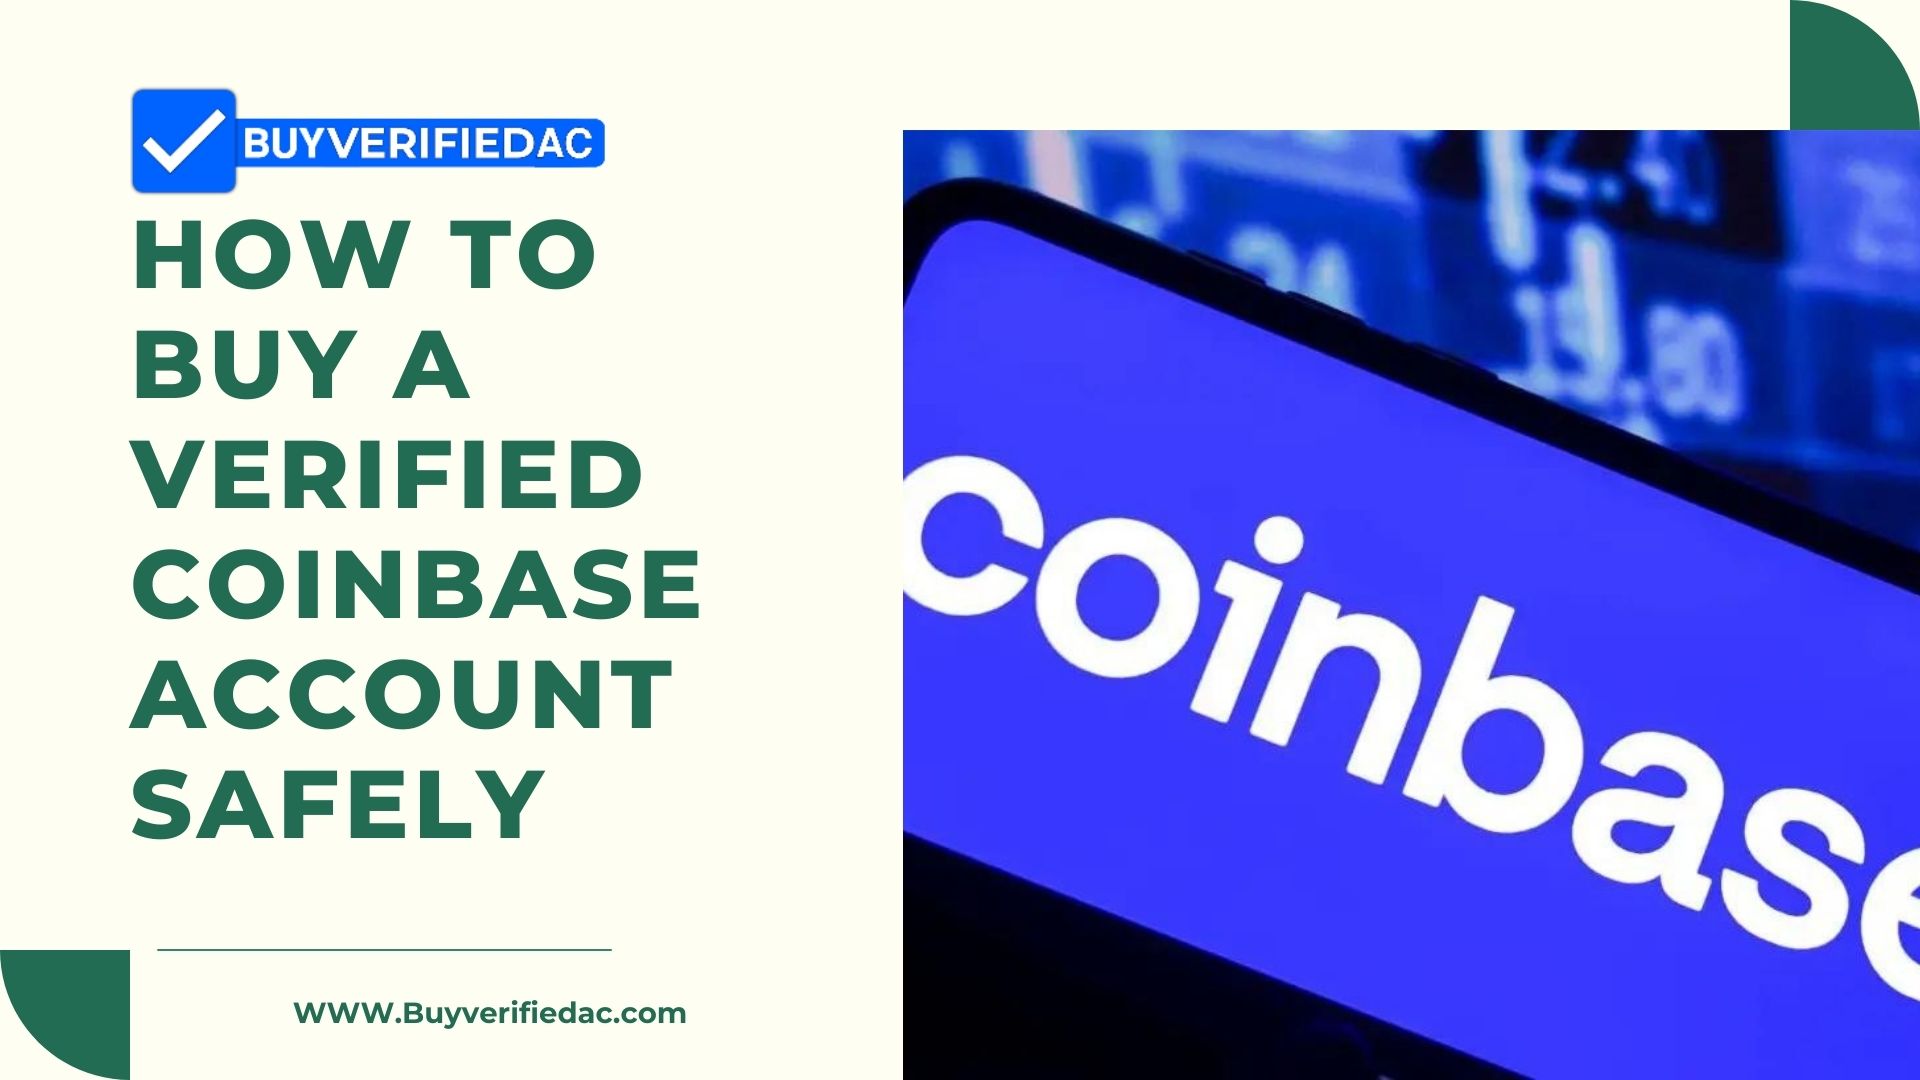 HOW TO BUY VERIFIED COINBASE ACCOUNT